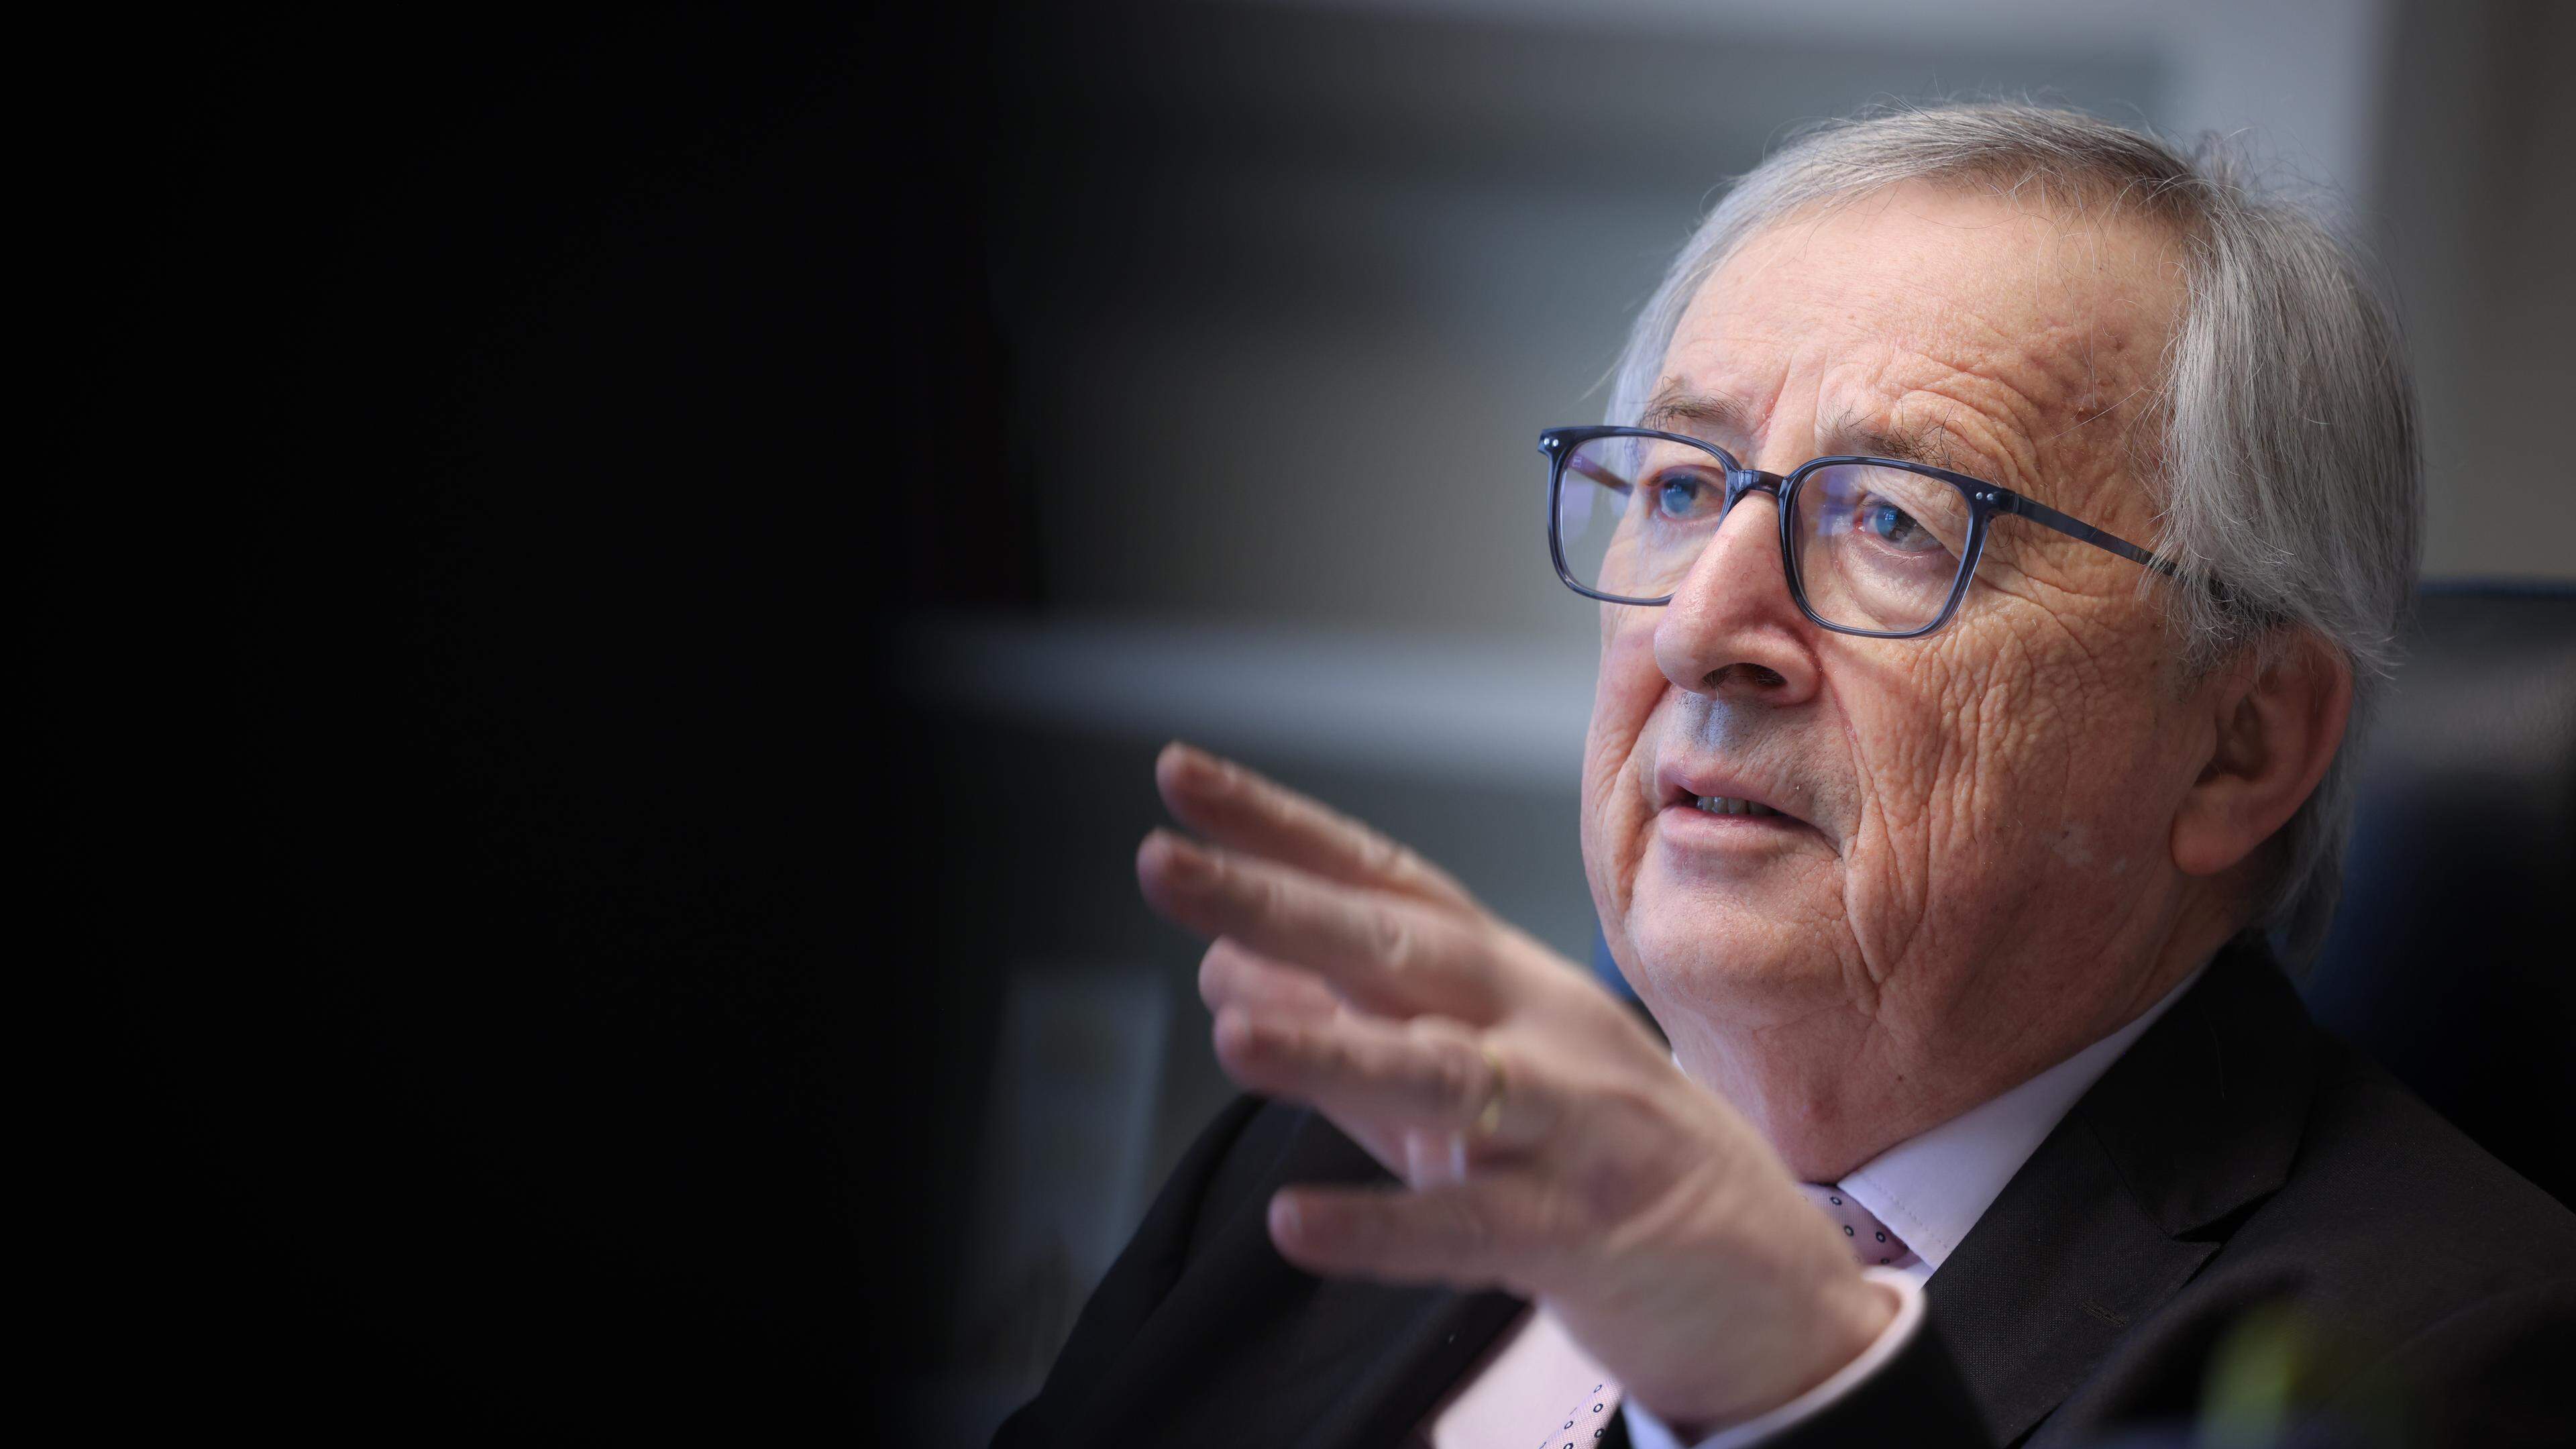 Jean-Claude Juncker told the ‘Luxemburger Wort’ that having a veto on tax has always allowed Luxembourg’s politicians at EU level to avoid having to argue their case